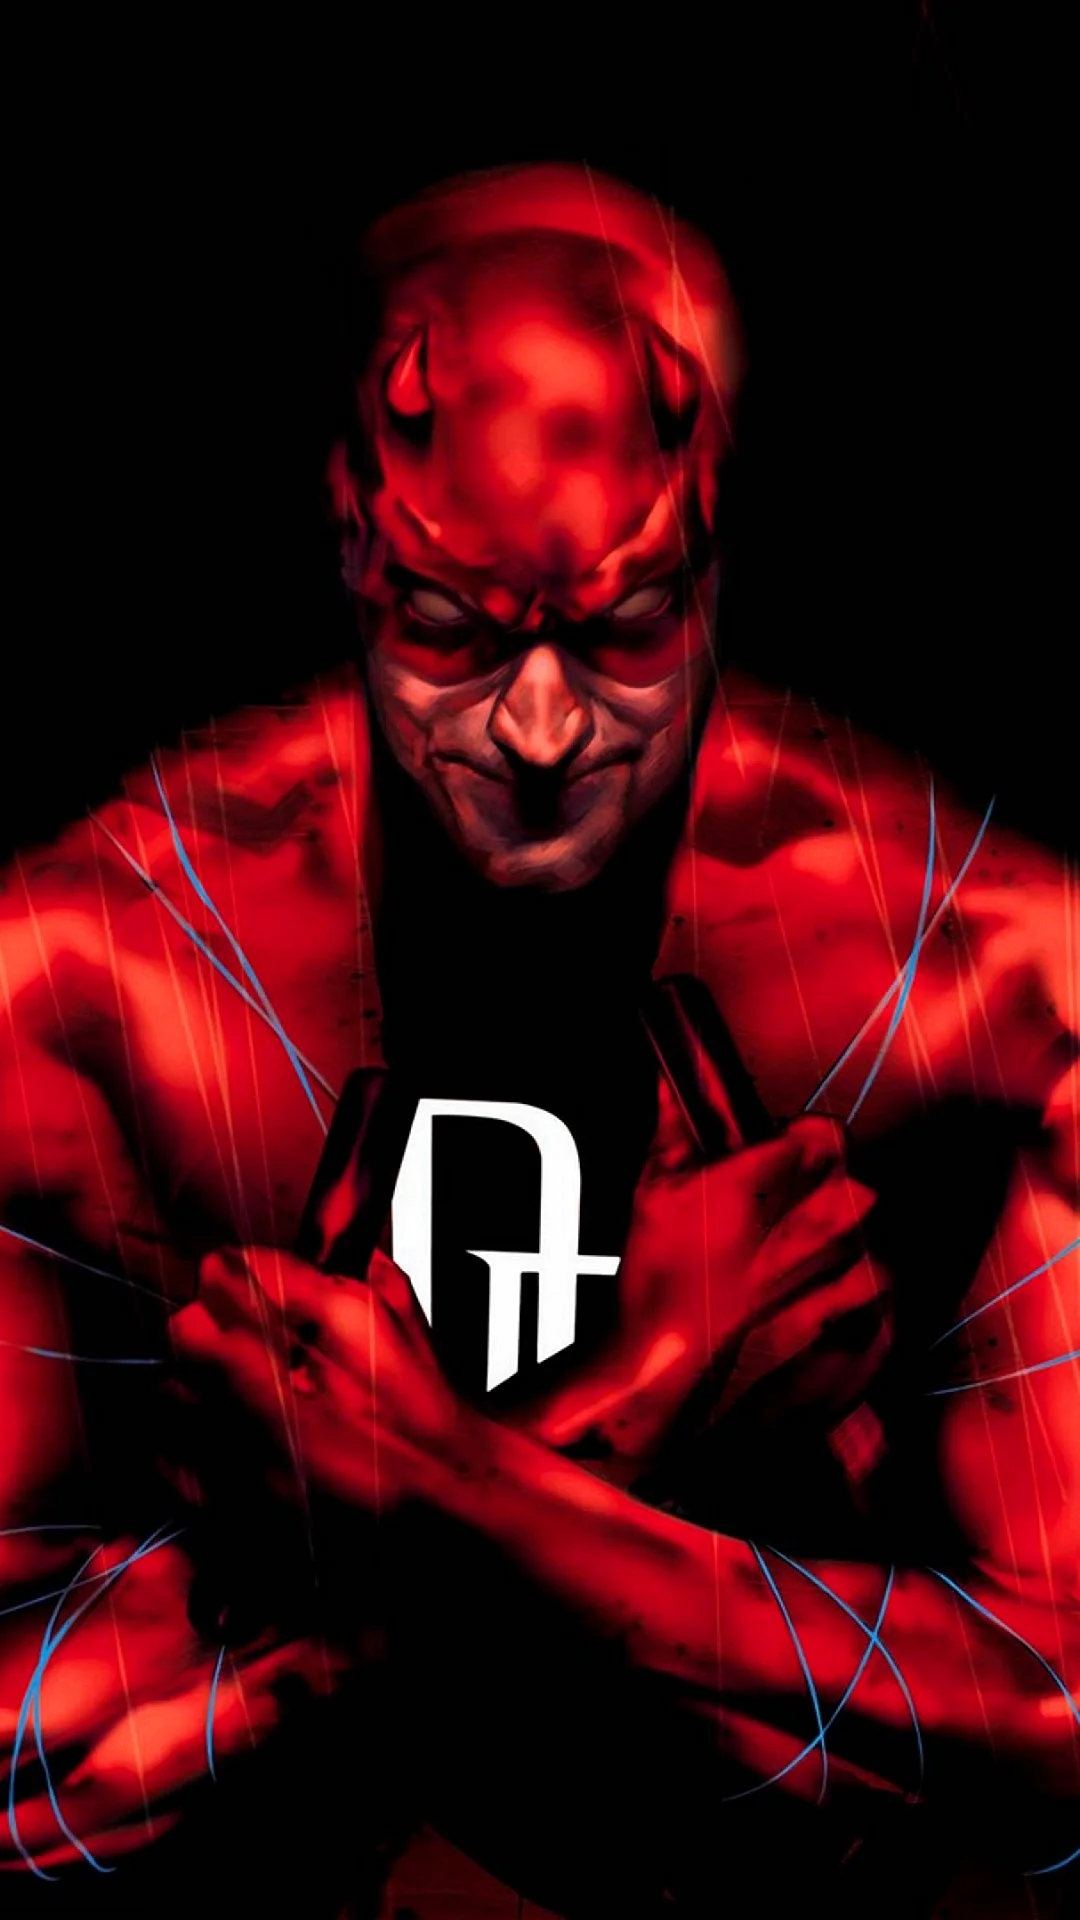 Red Hero Wallpaper For iPhone